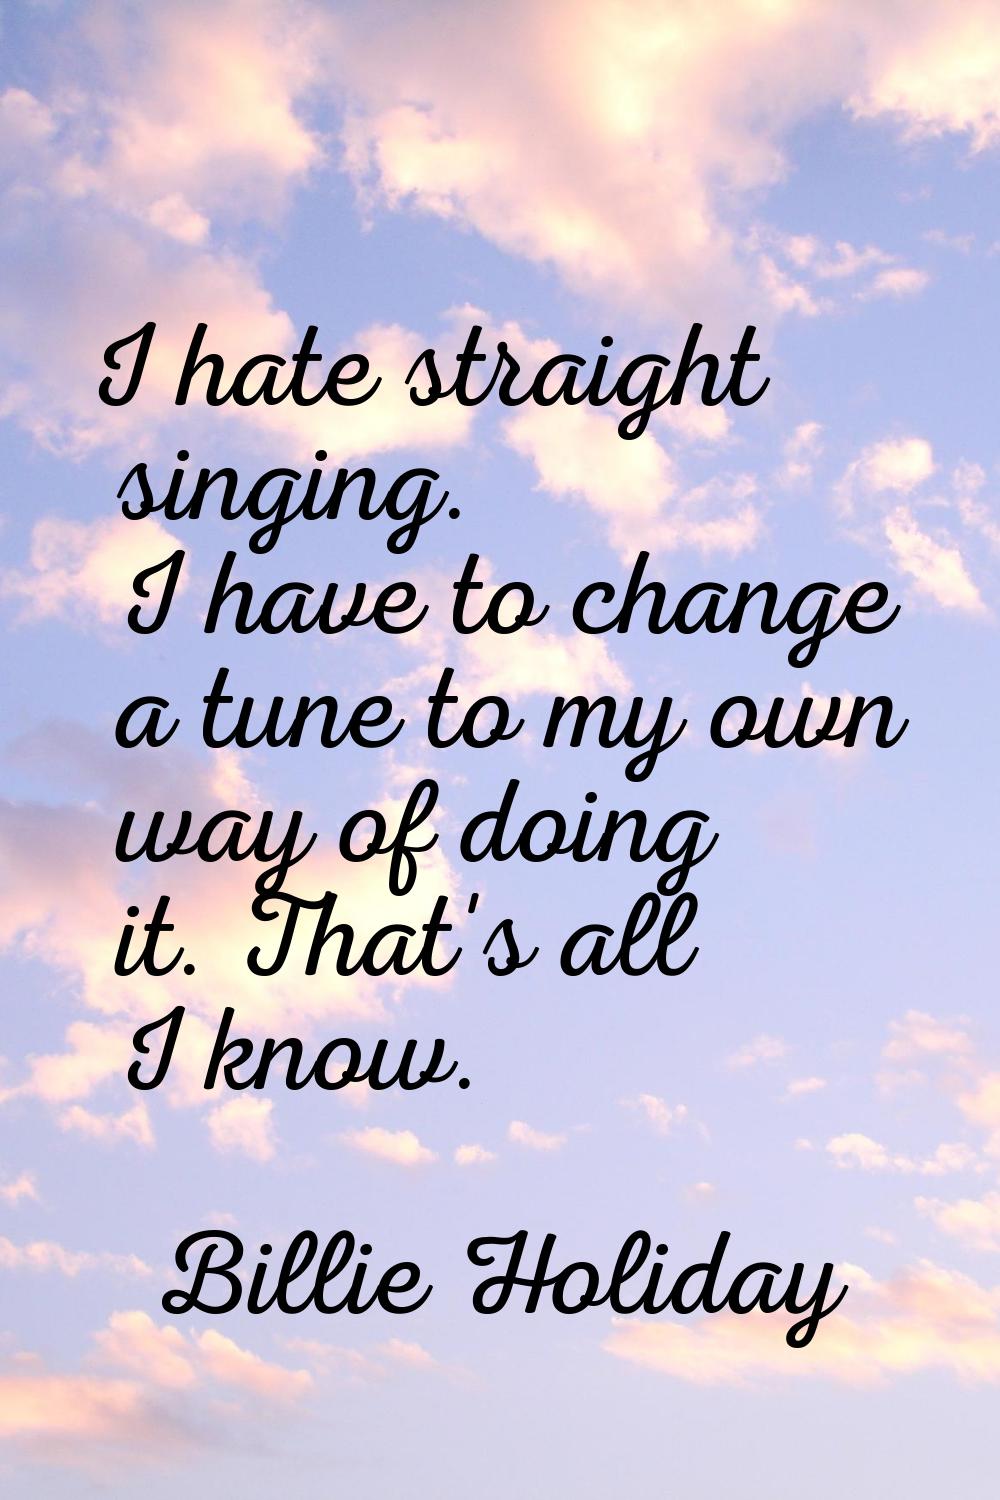 I hate straight singing. I have to change a tune to my own way of doing it. That's all I know.